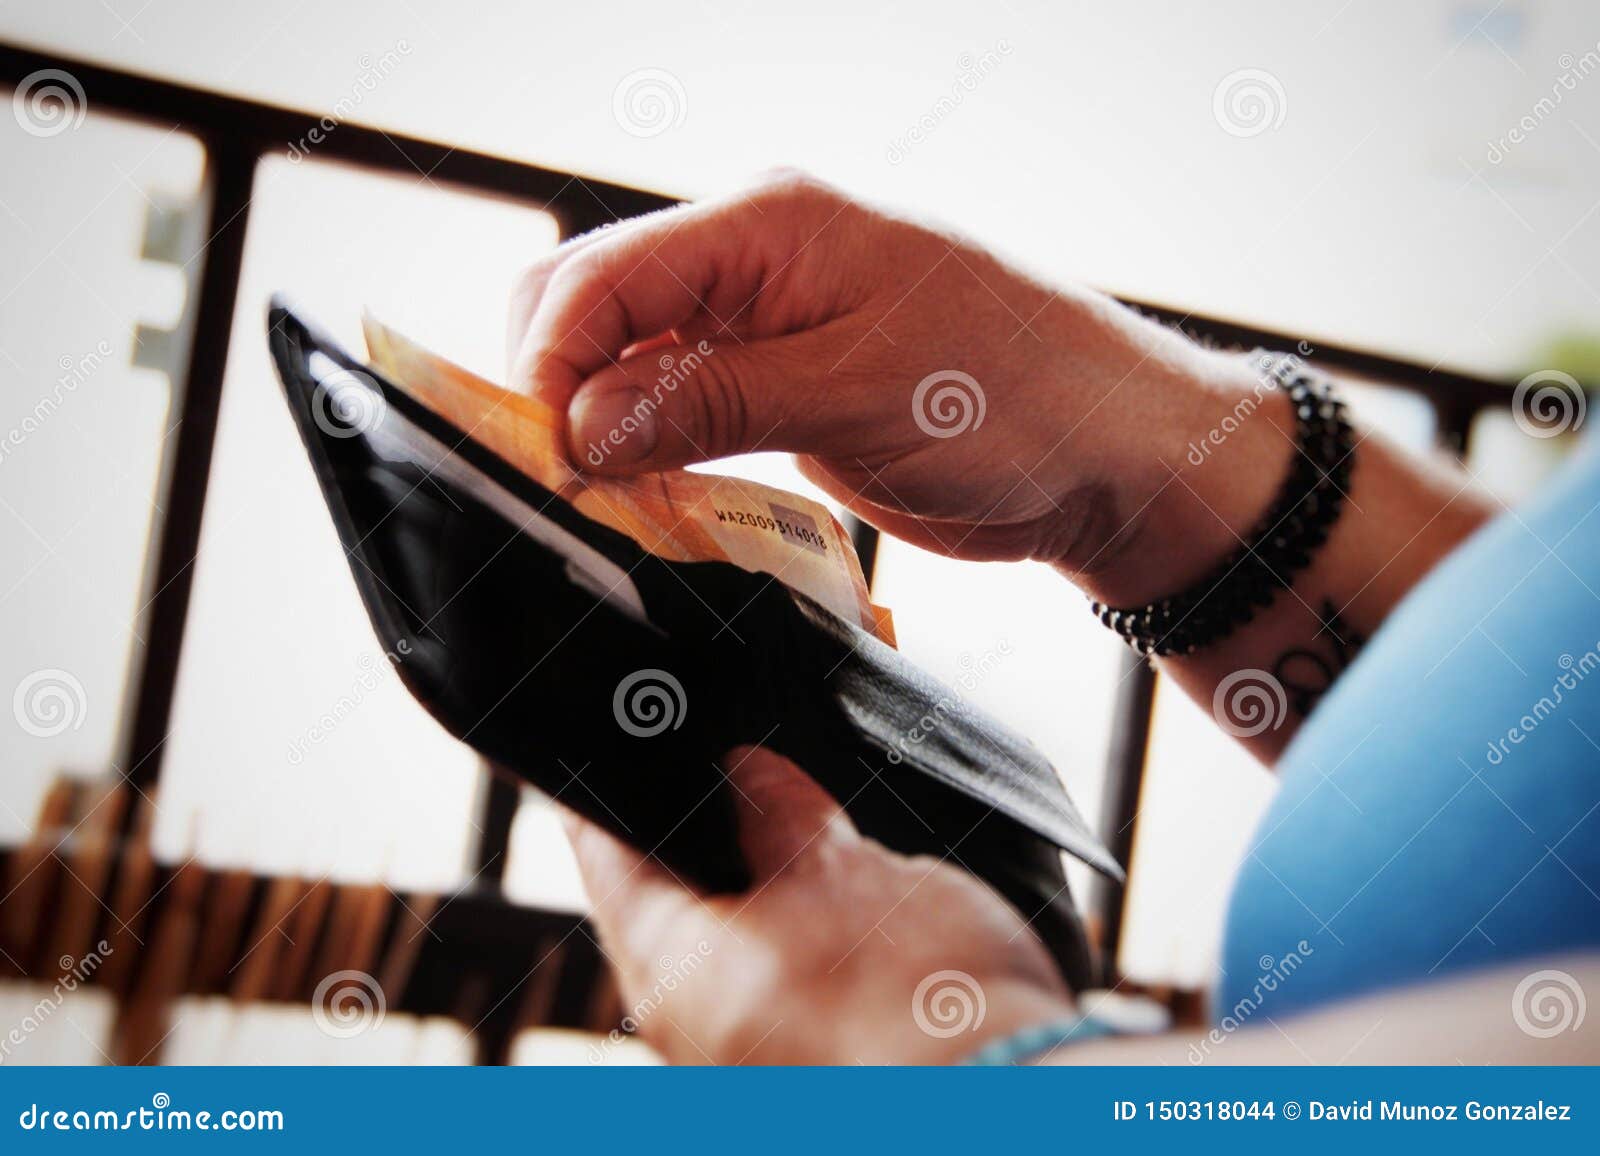 person taking money out of his wallet.